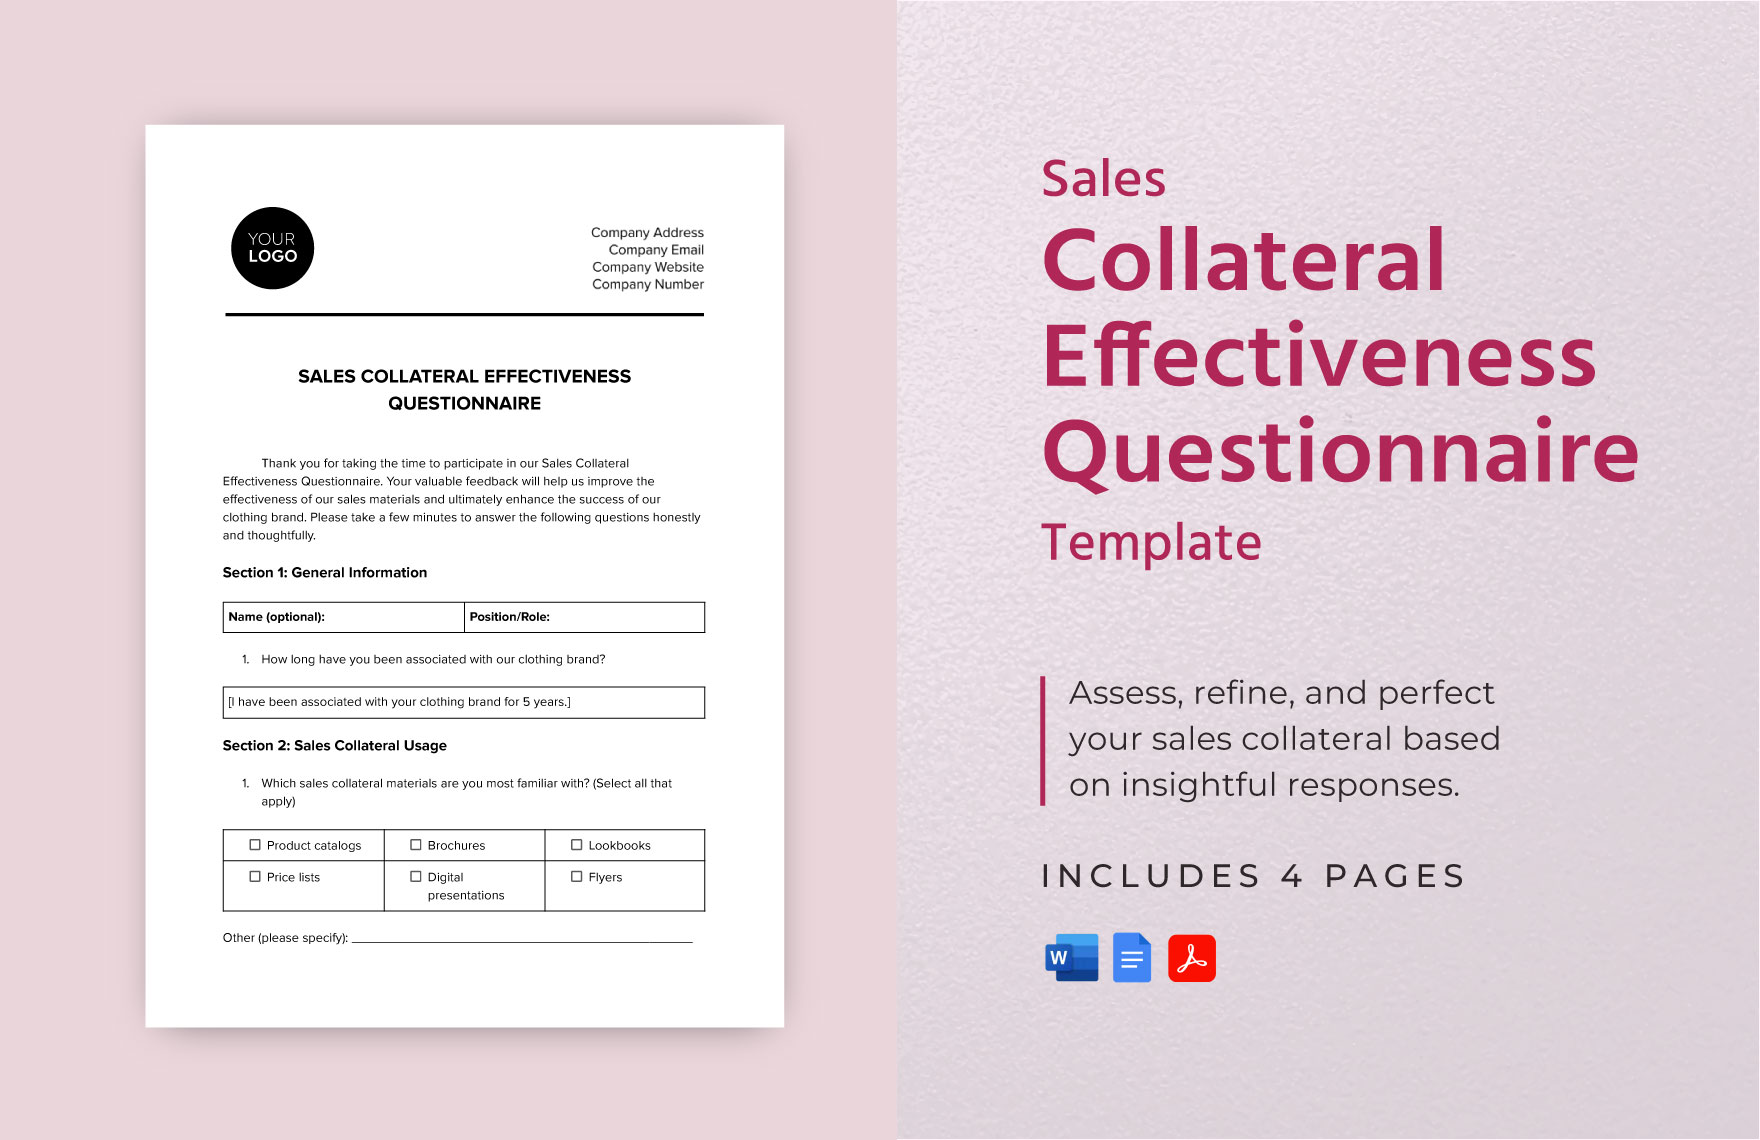 Sales Collateral Effectiveness Questionnaire Template